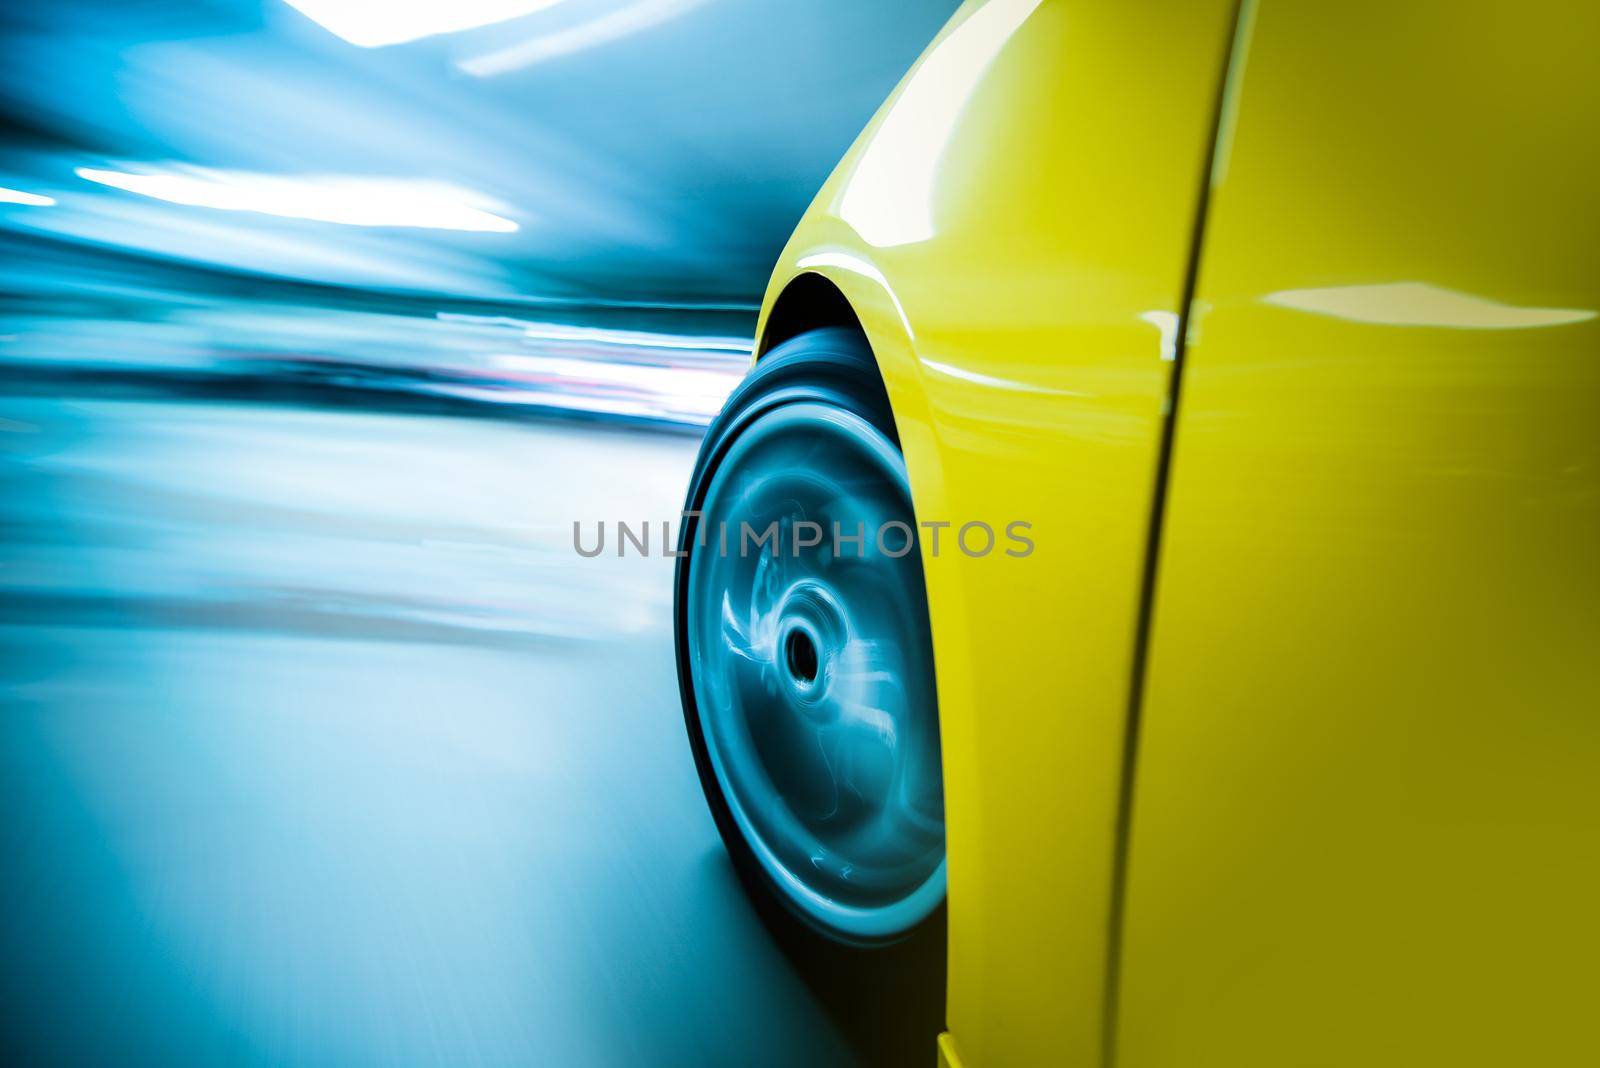 Speeding Car at Night. Long Exposure City Drive. Front Wheel in Motion Closeup. Motion Blur Transportation Concept